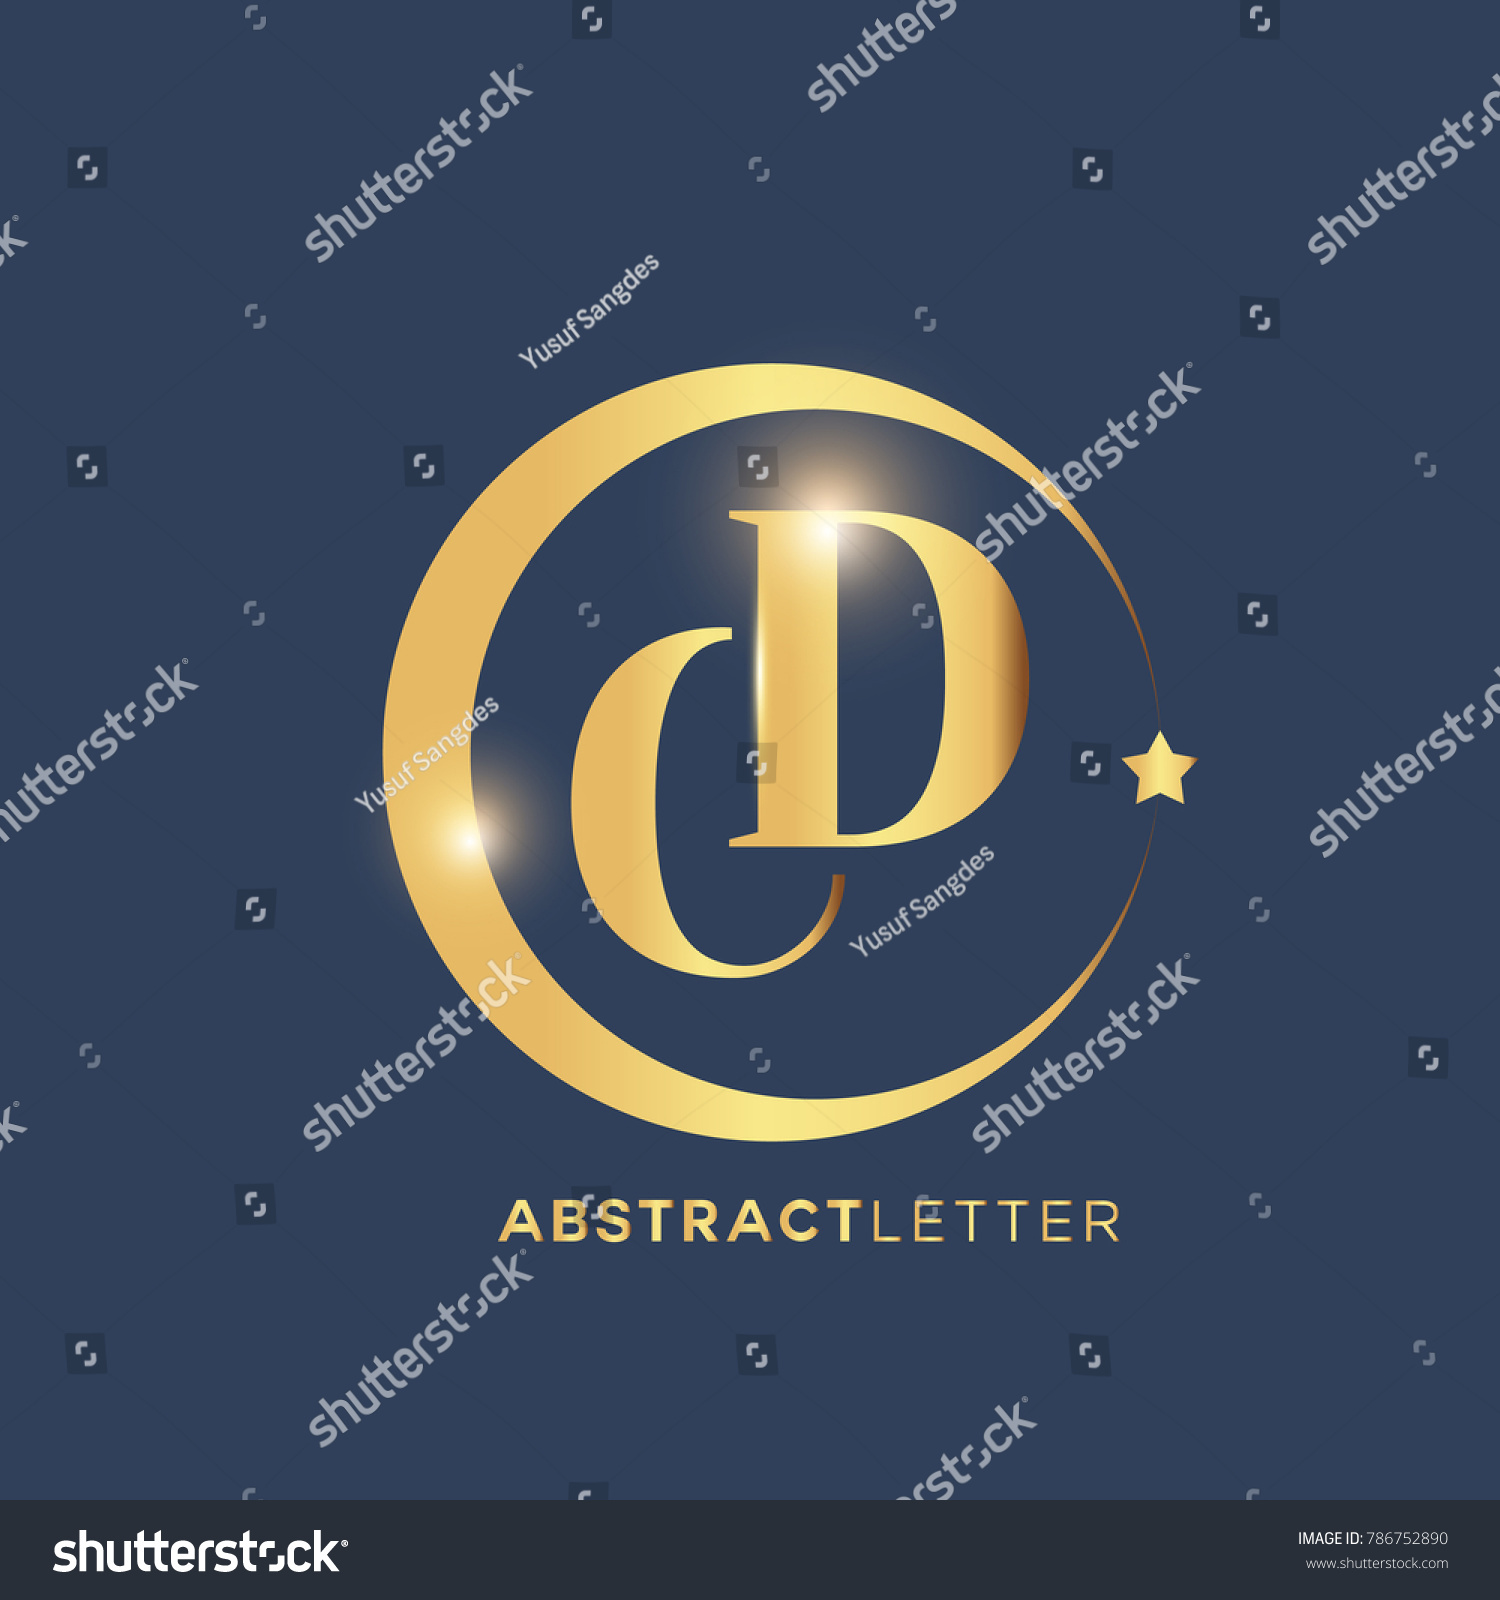 Cd Logo Design Template Luxury Gold Stock Vector Royalty Free